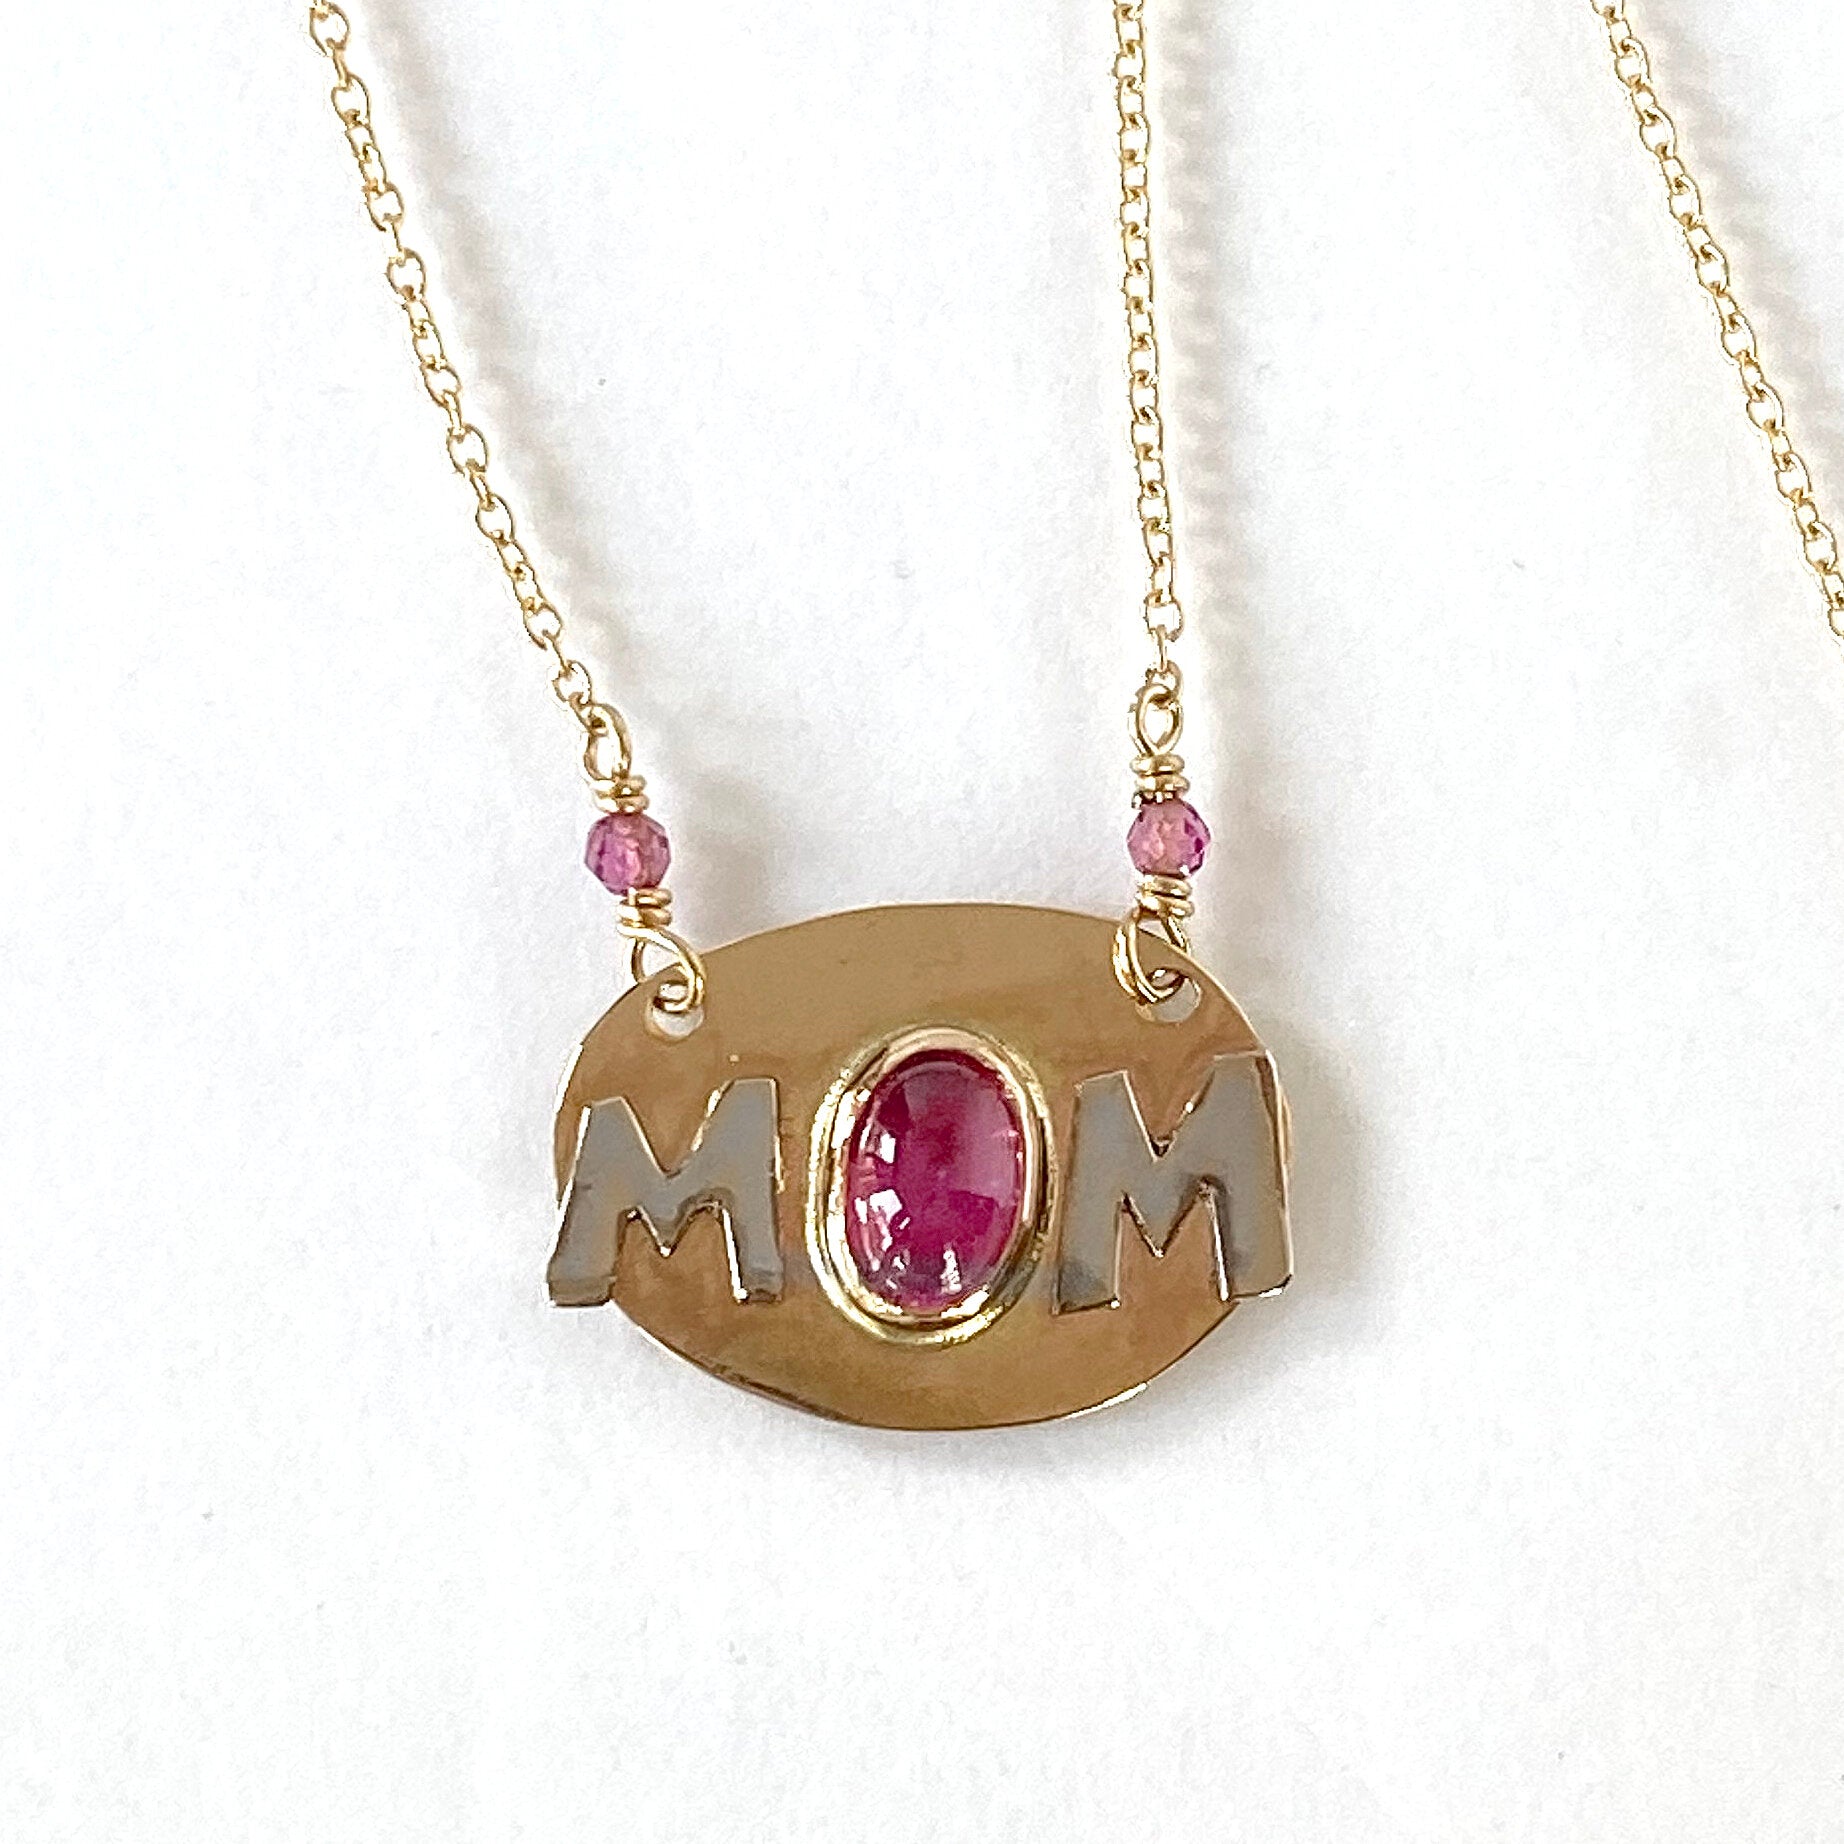 14K MOM Necklace Rubellite Tourmaline, SOLID Yellow Gold, One of a kind